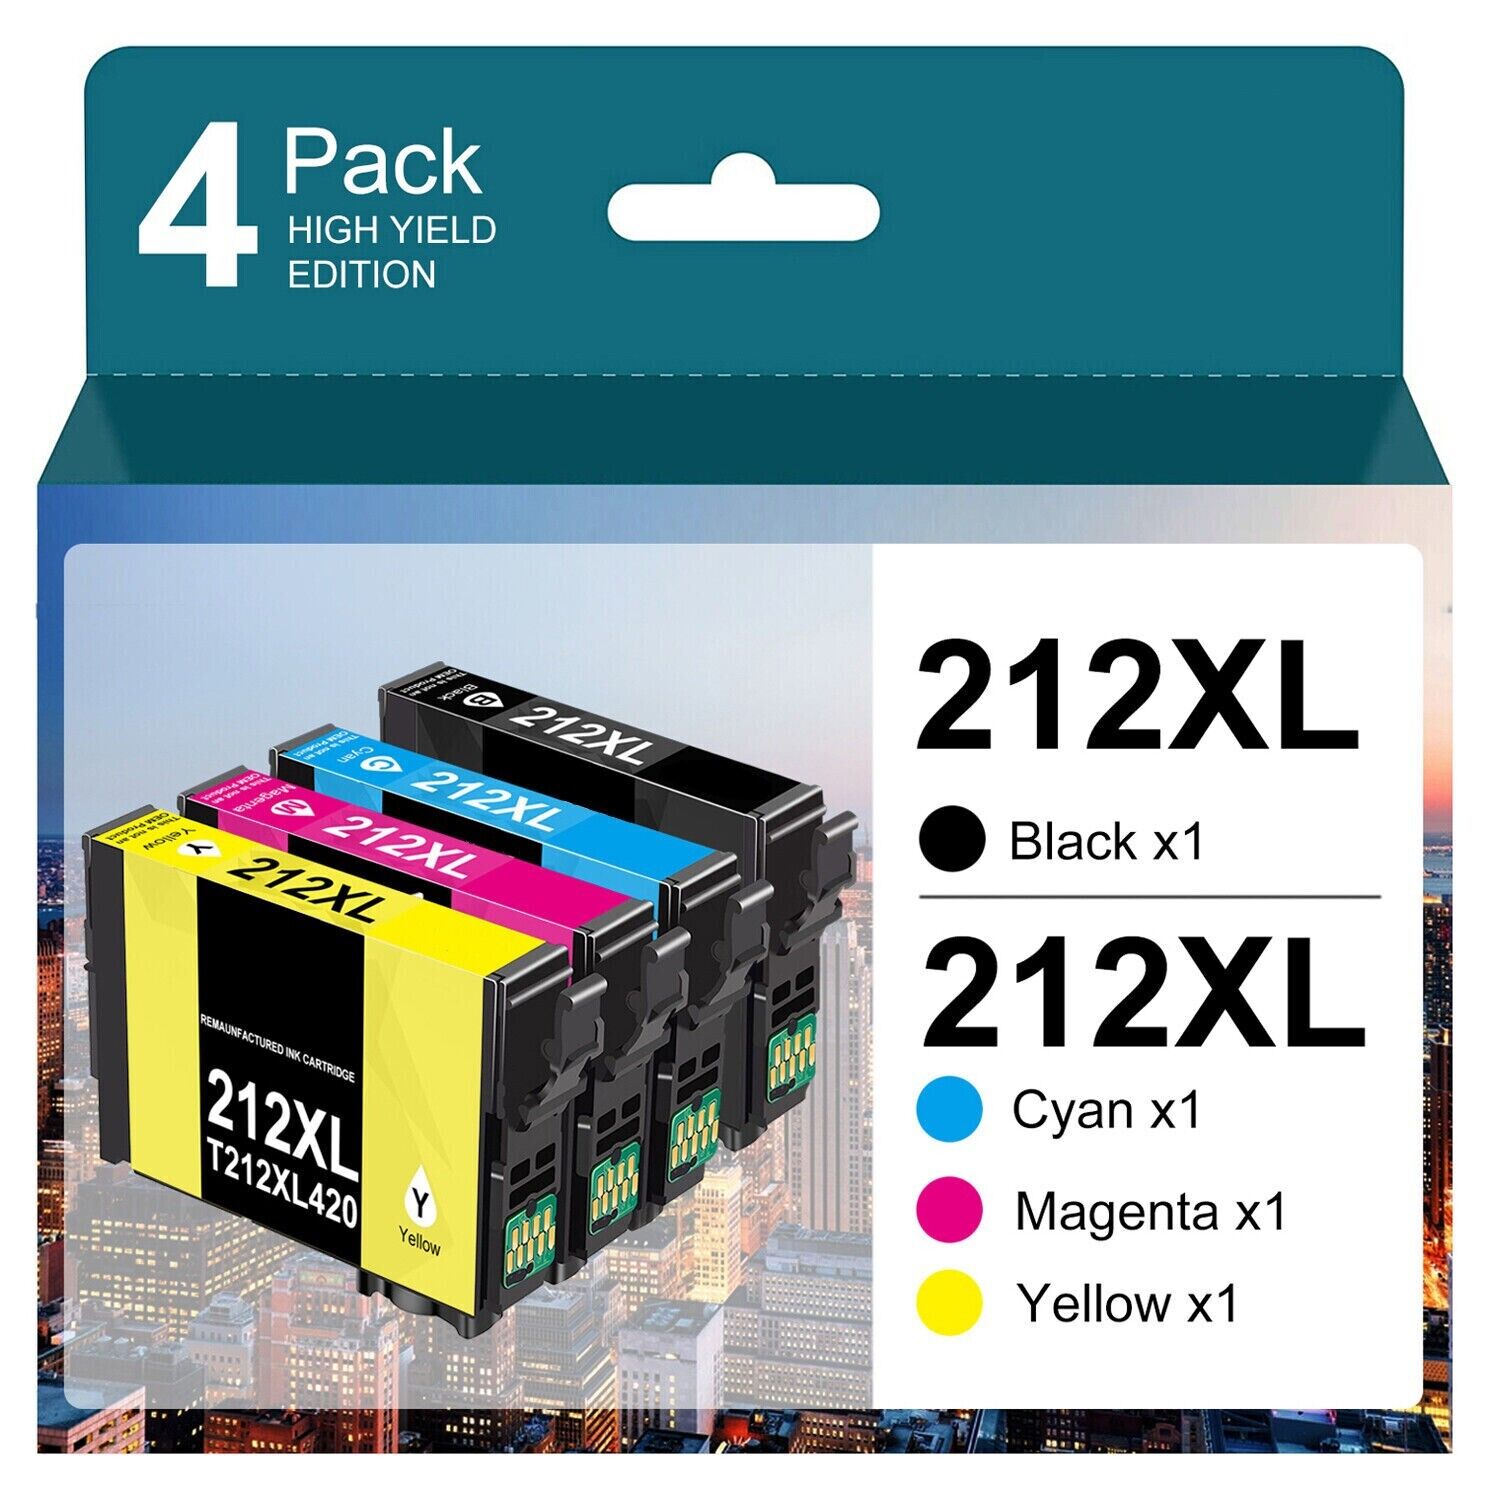 4 Pack T212XL 212 XL Replacement Ink Cartridge for XP-4105 XP-4100 WF-2830